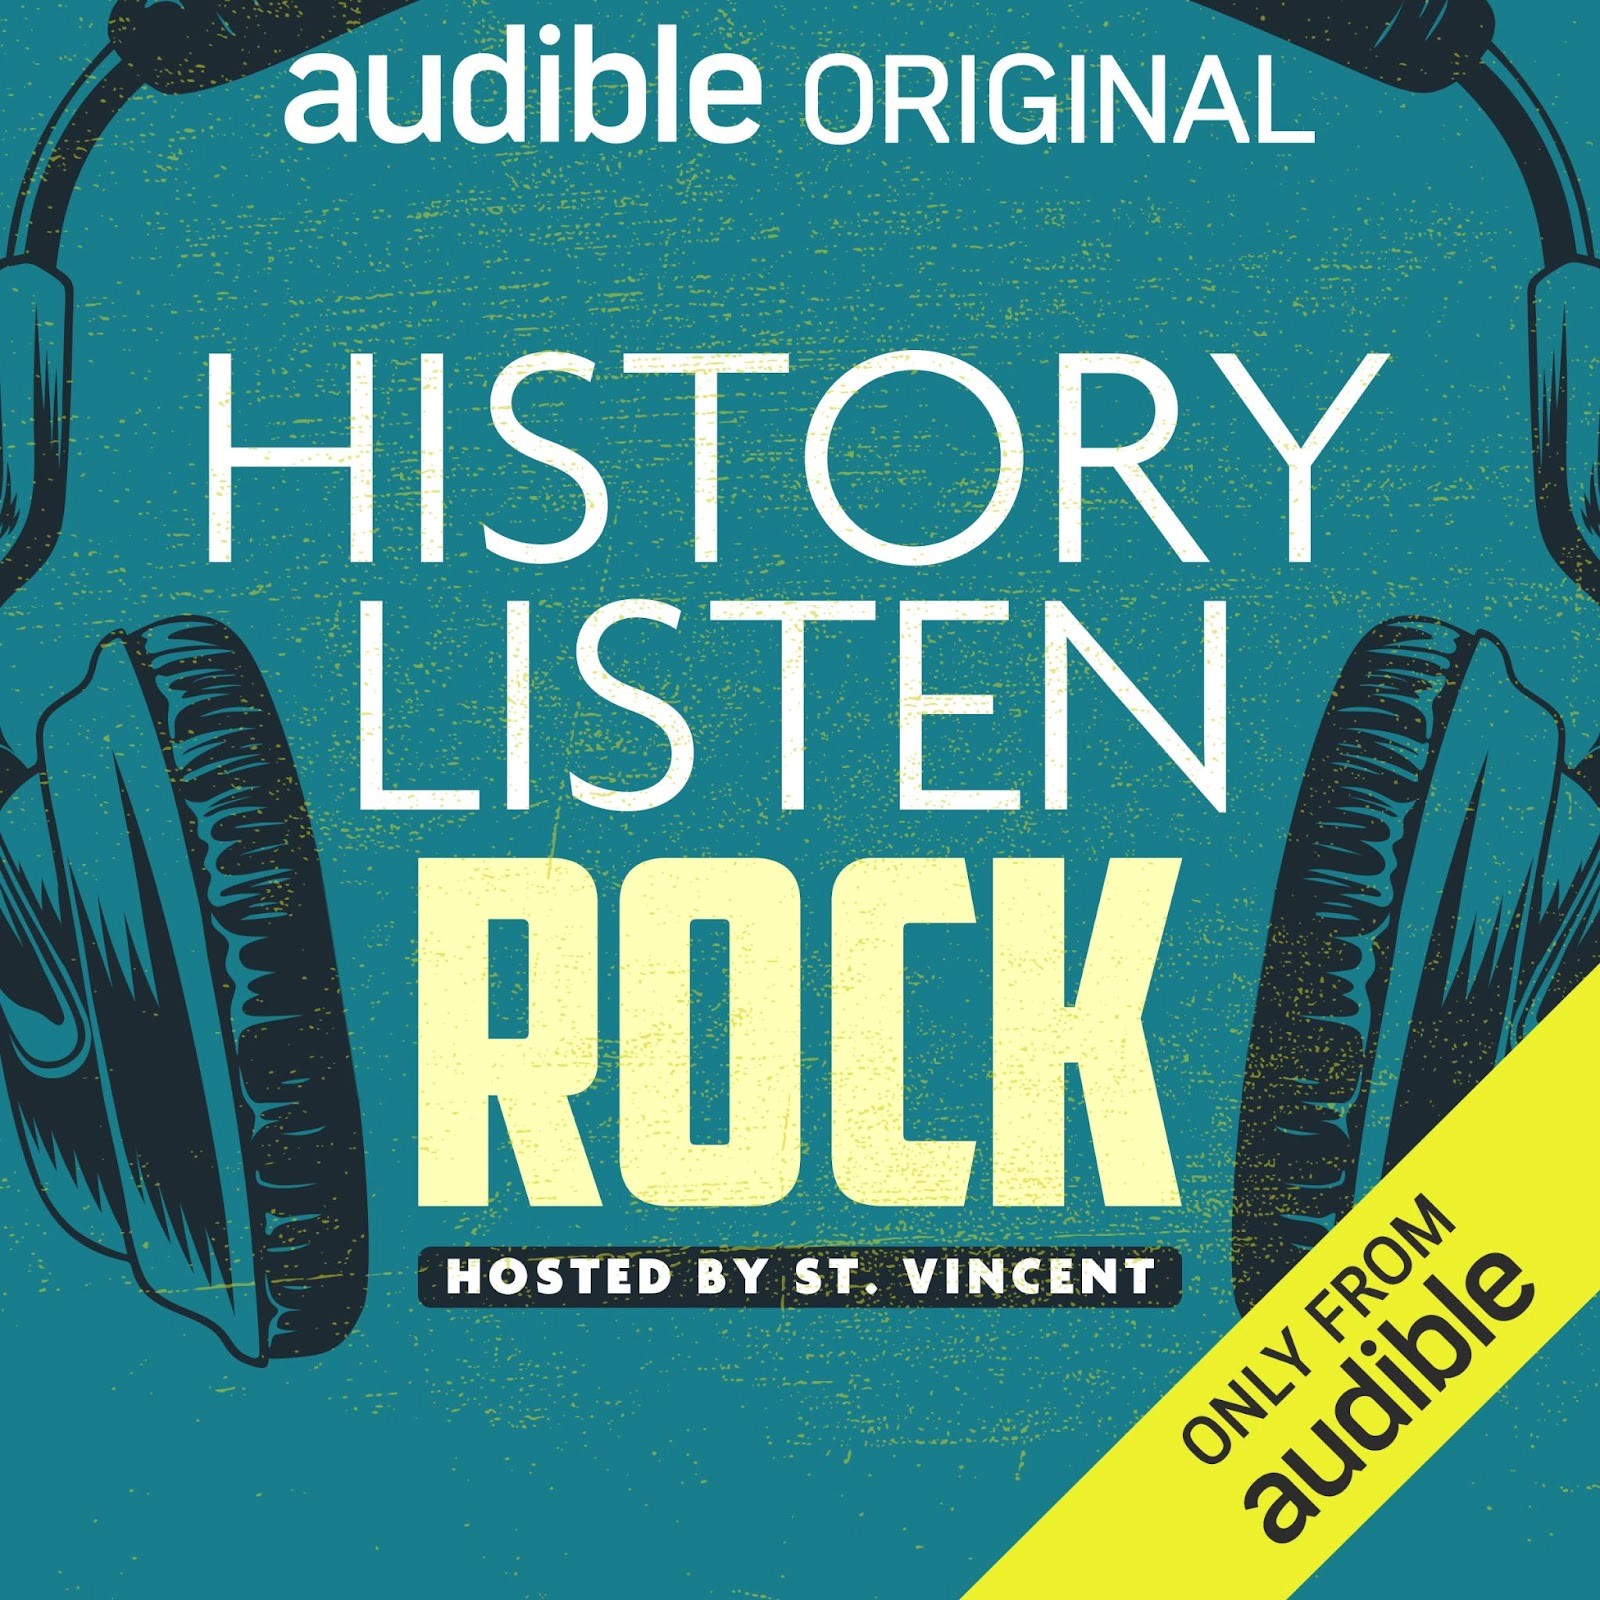 St. Vincent To Host New Podcast ‘History Listen: Rock’ Coming Jan. 12 from Audible & Double Elvis